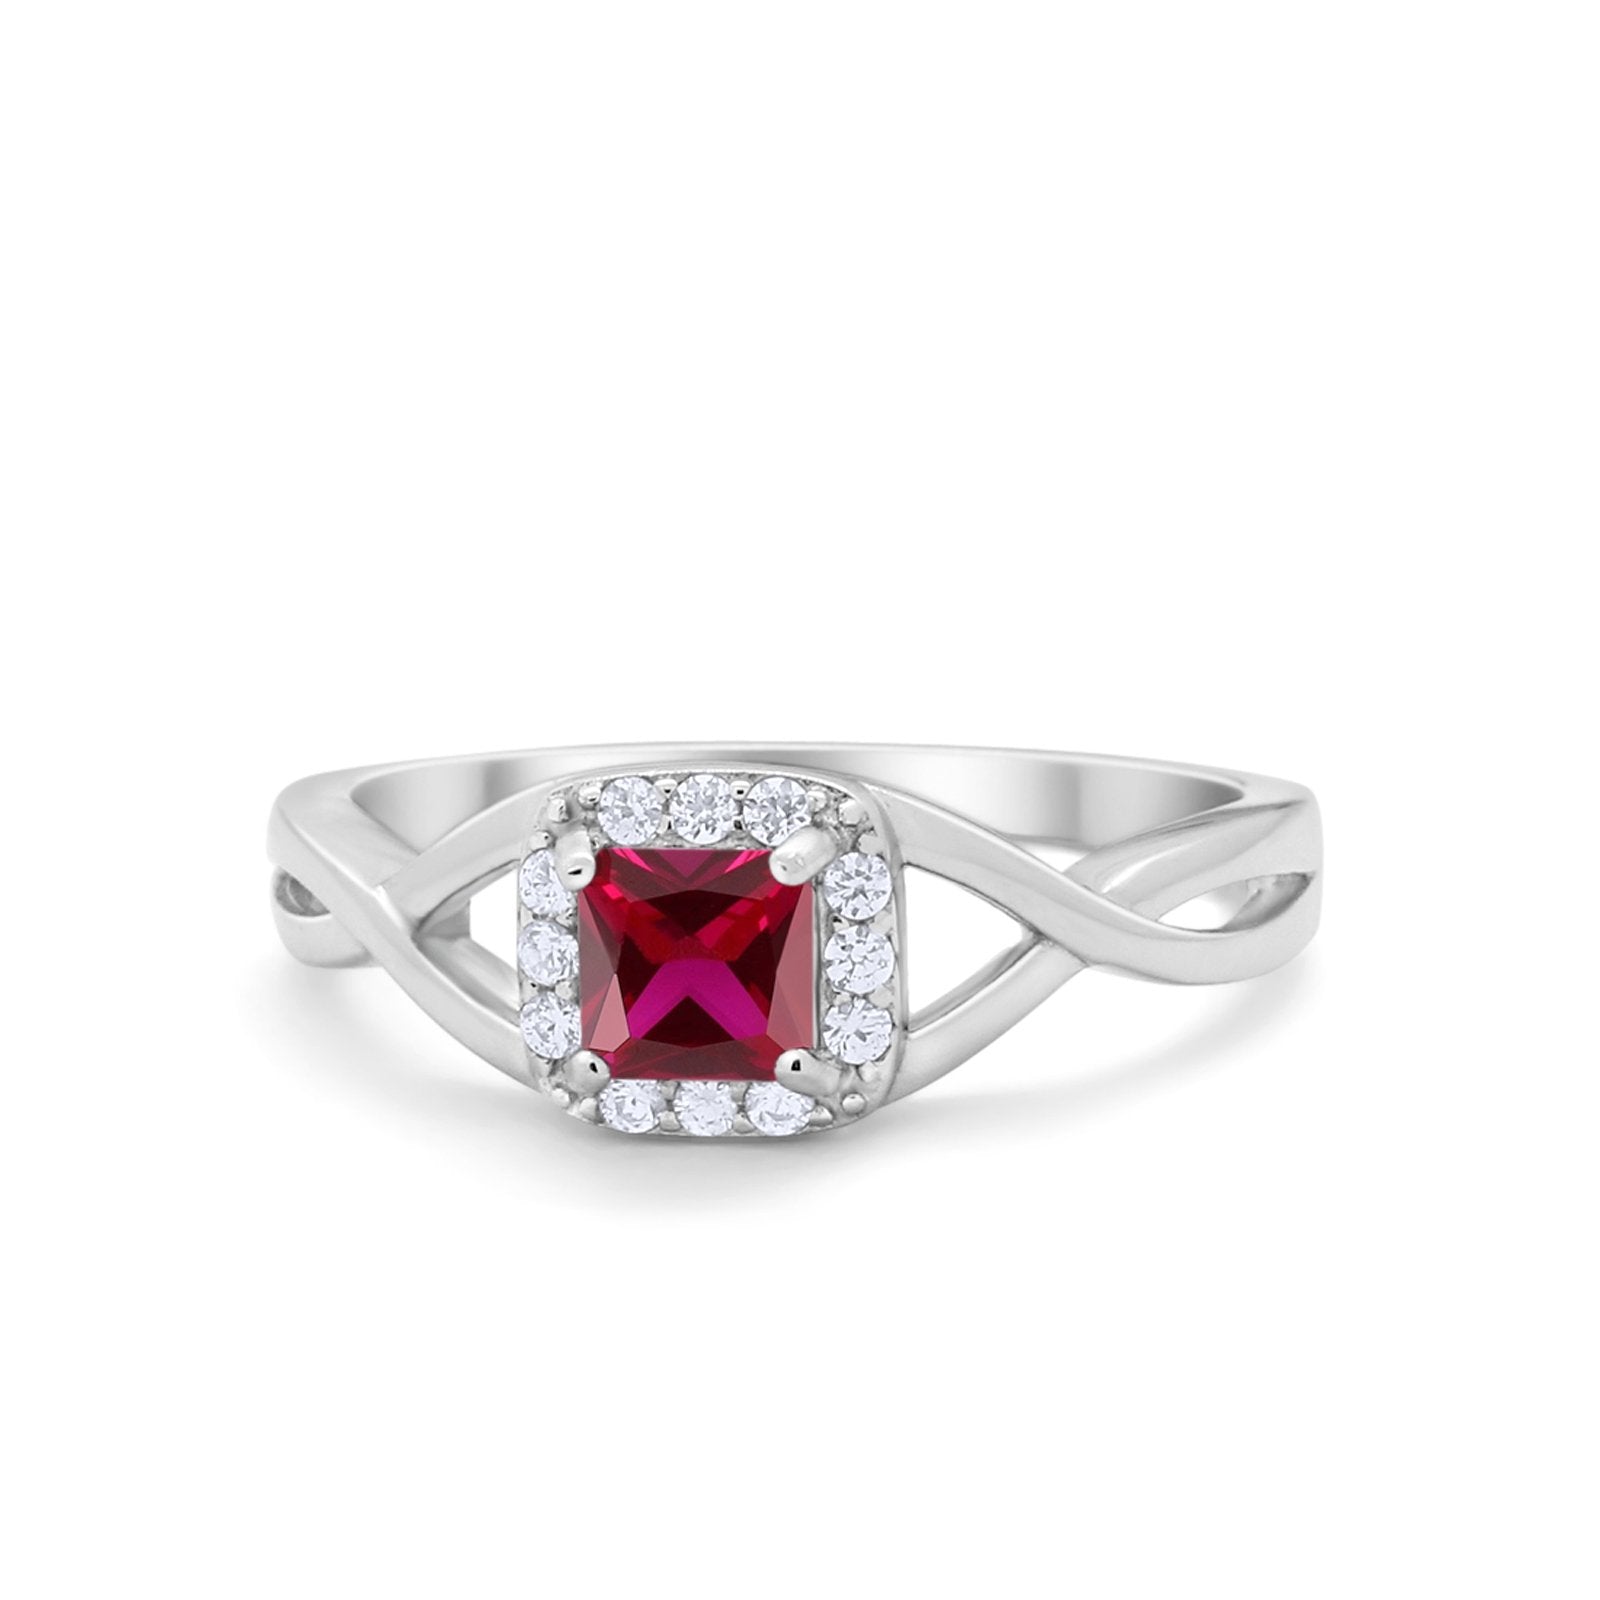 Solitaire Infinity Shank Ring Princess Cut Simulated Ruby CZ 925 Sterling Silver